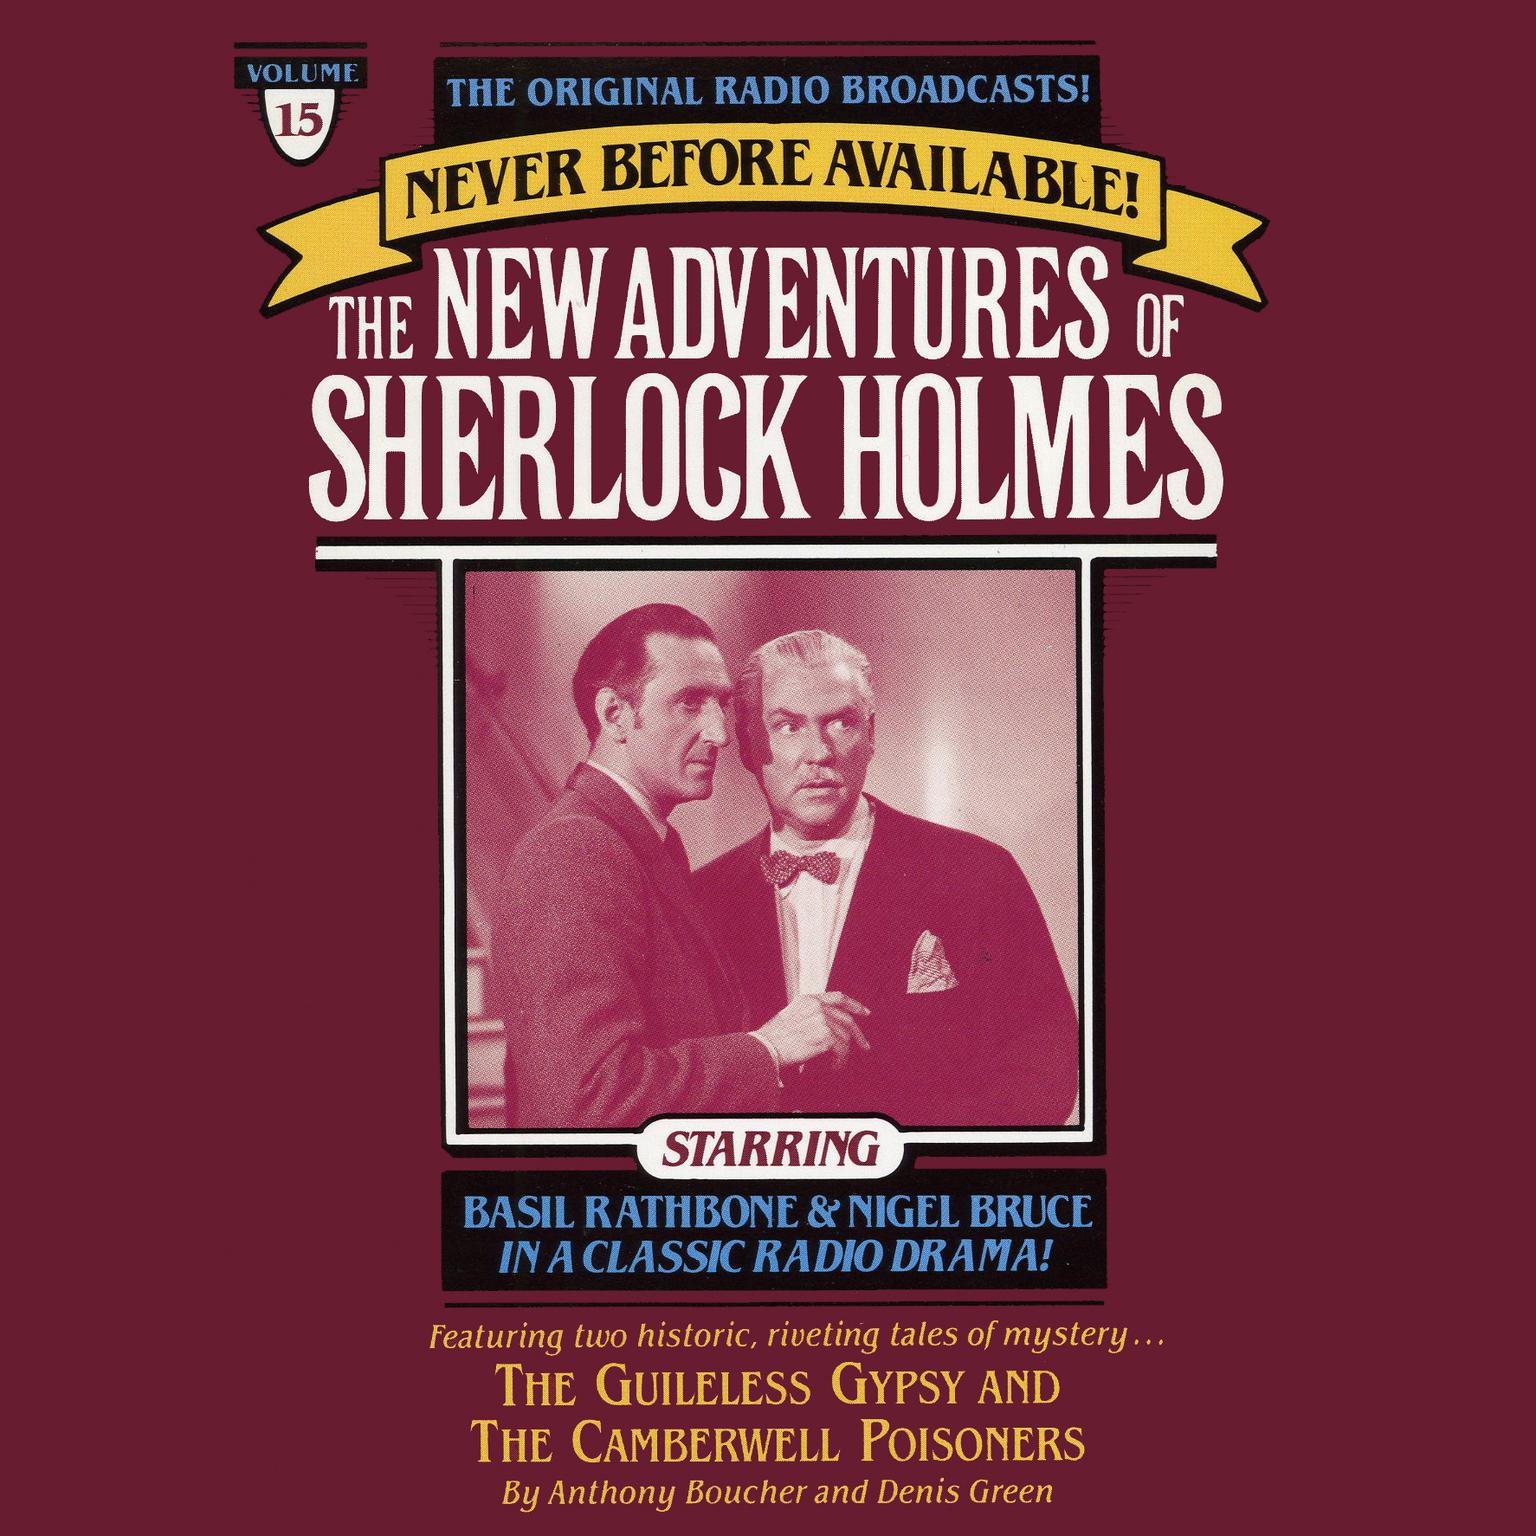 The Guileless Gypsy and The Camberville Poiseners (Abridged): The New Adventures of Sherlock Holmes, Episode 15 Audiobook, by Anthony Boucher